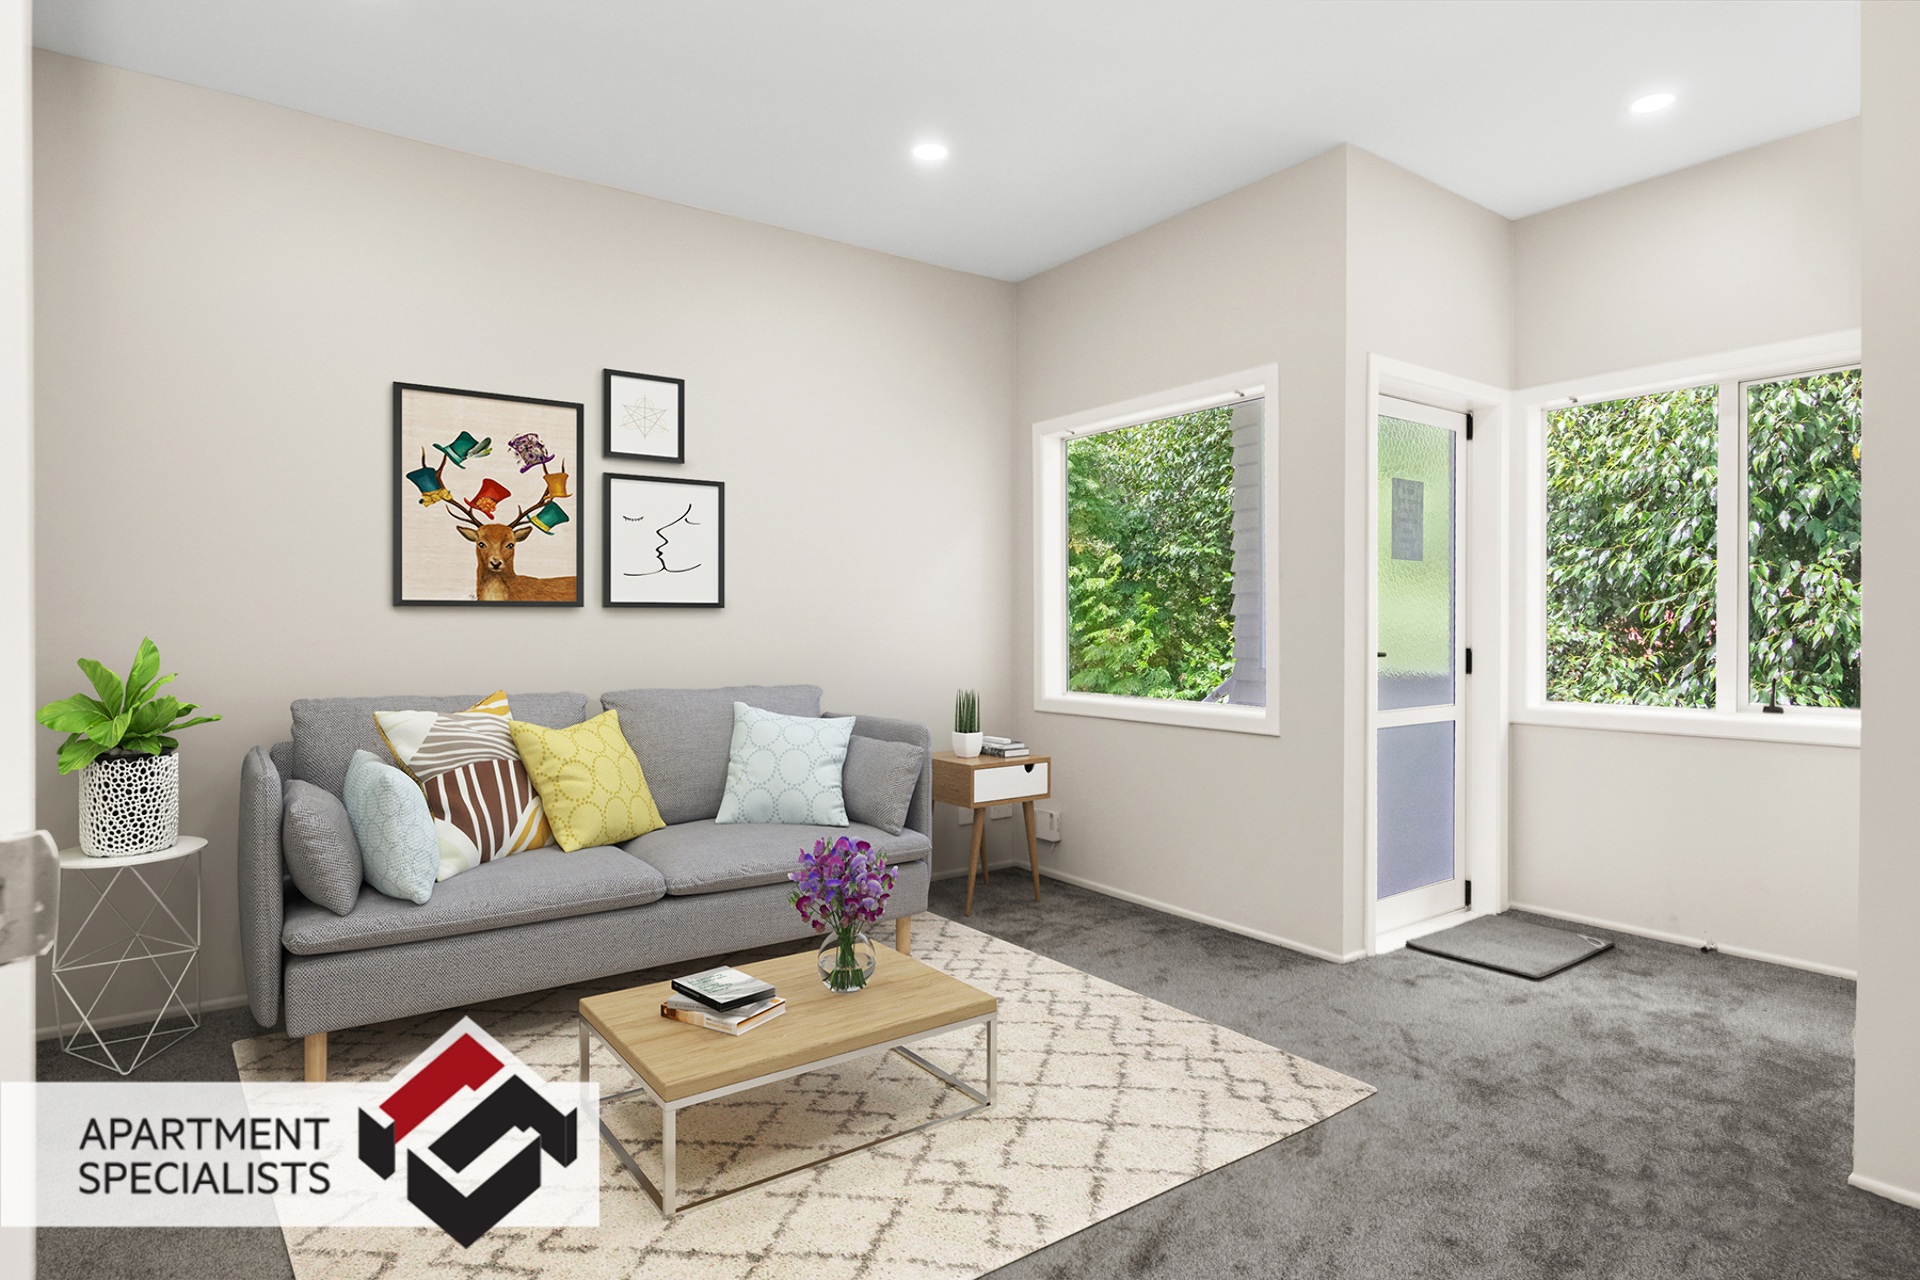 1 | 325 Mount Albert Road, Mount Roskill | Apartment Specialists